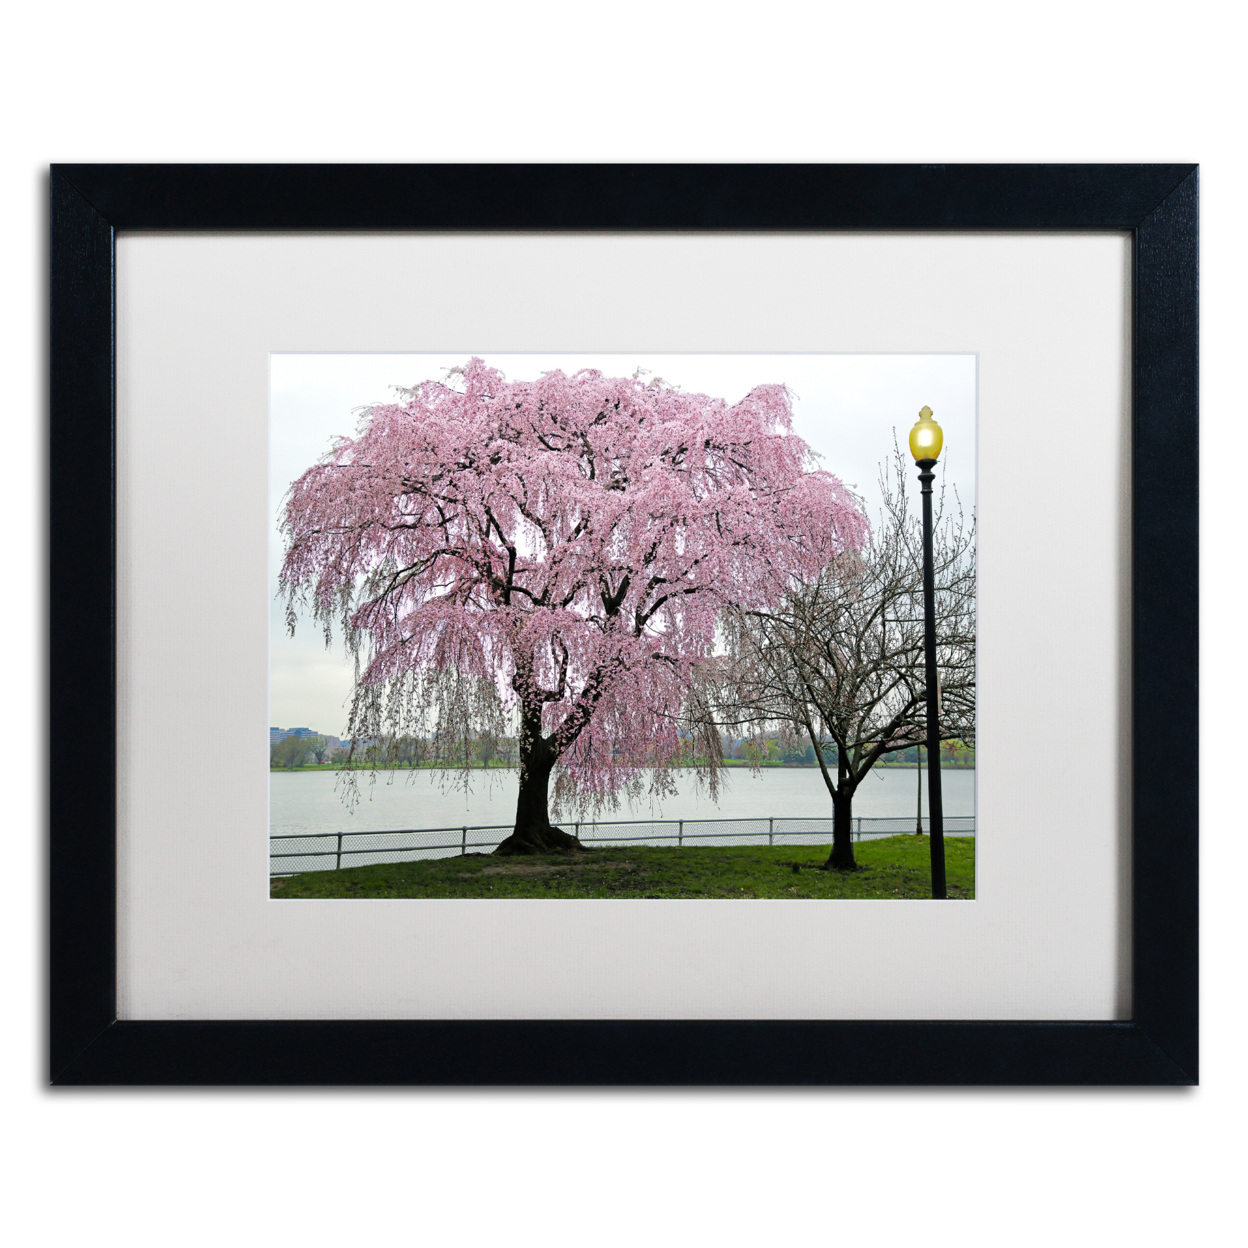 CATeyes 'Cherry Tree' Black Wooden Framed Art 18 X 22 Inches